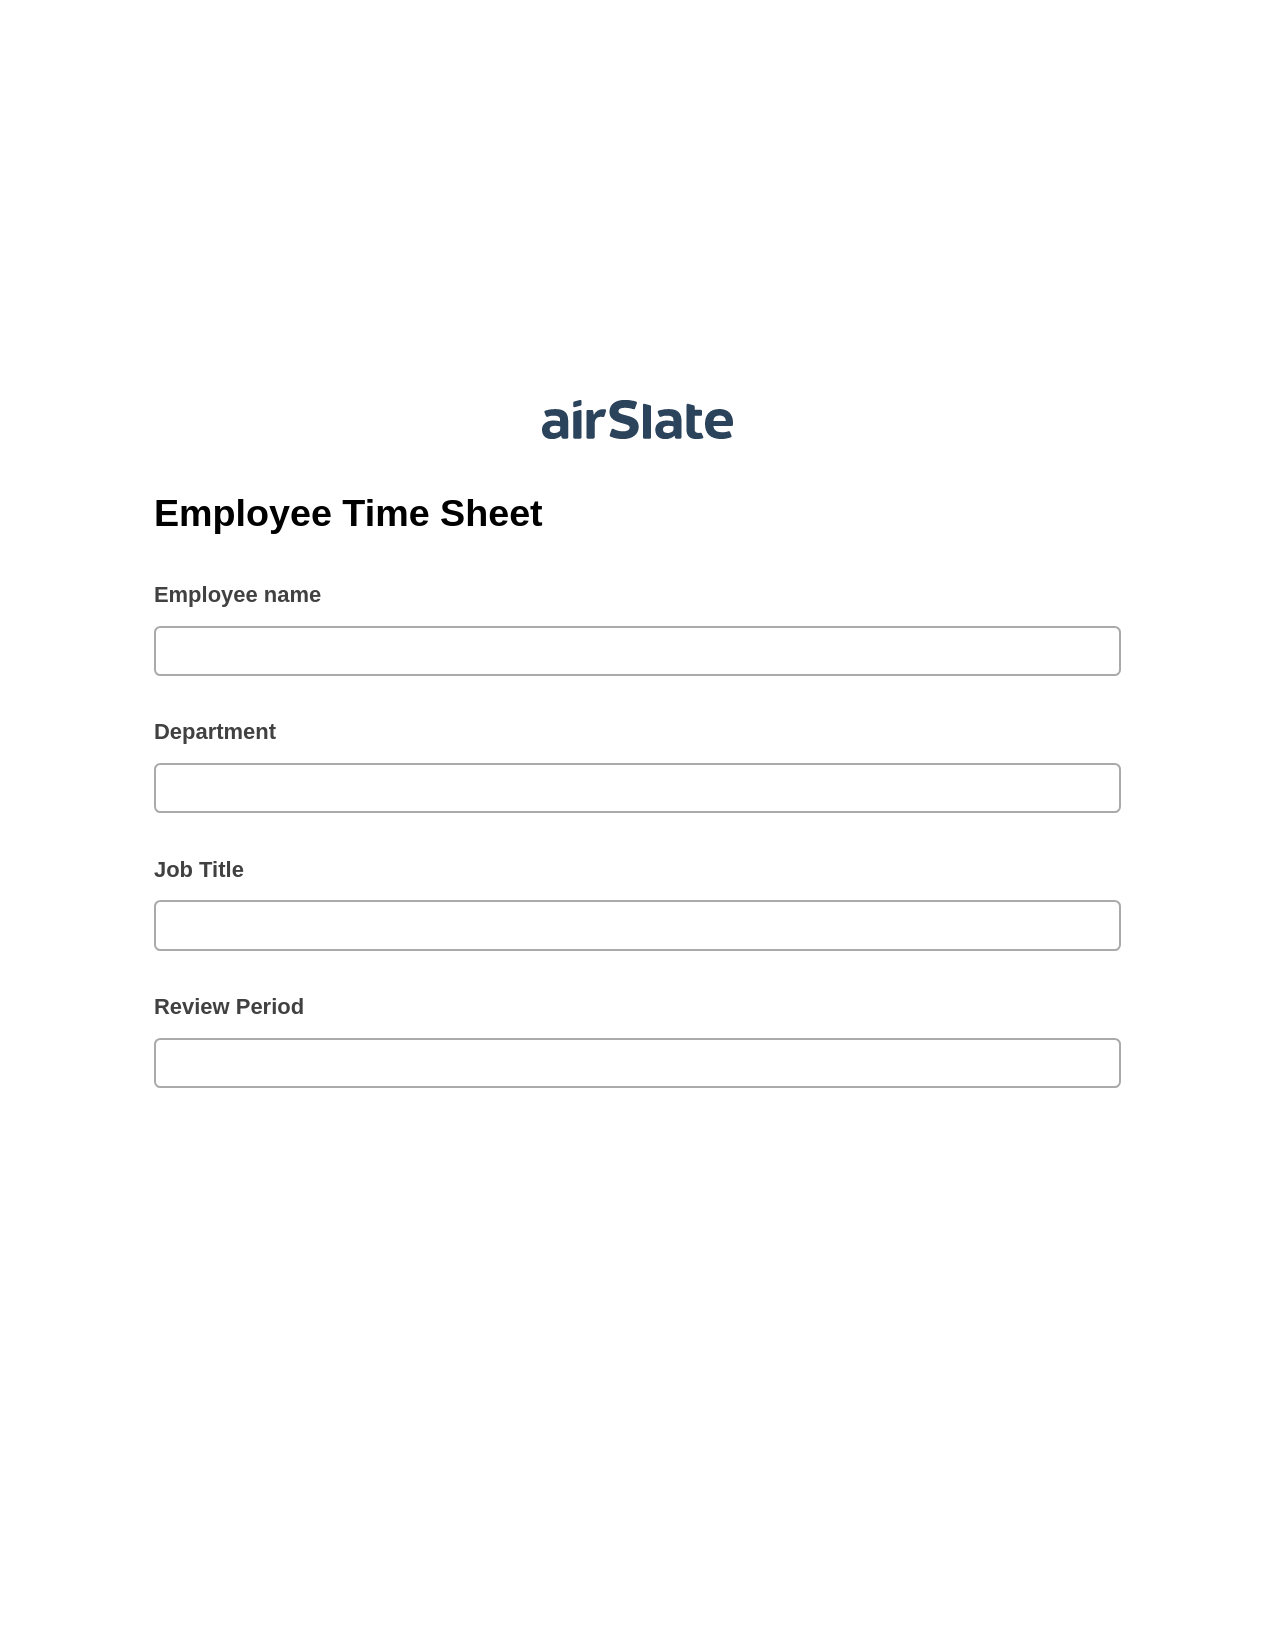 Multirole Employee Time Sheet Pre-fill Dropdowns from Airtable, Create MS Dynamics 365 Records Bot, Archive to SharePoint Folder Bot